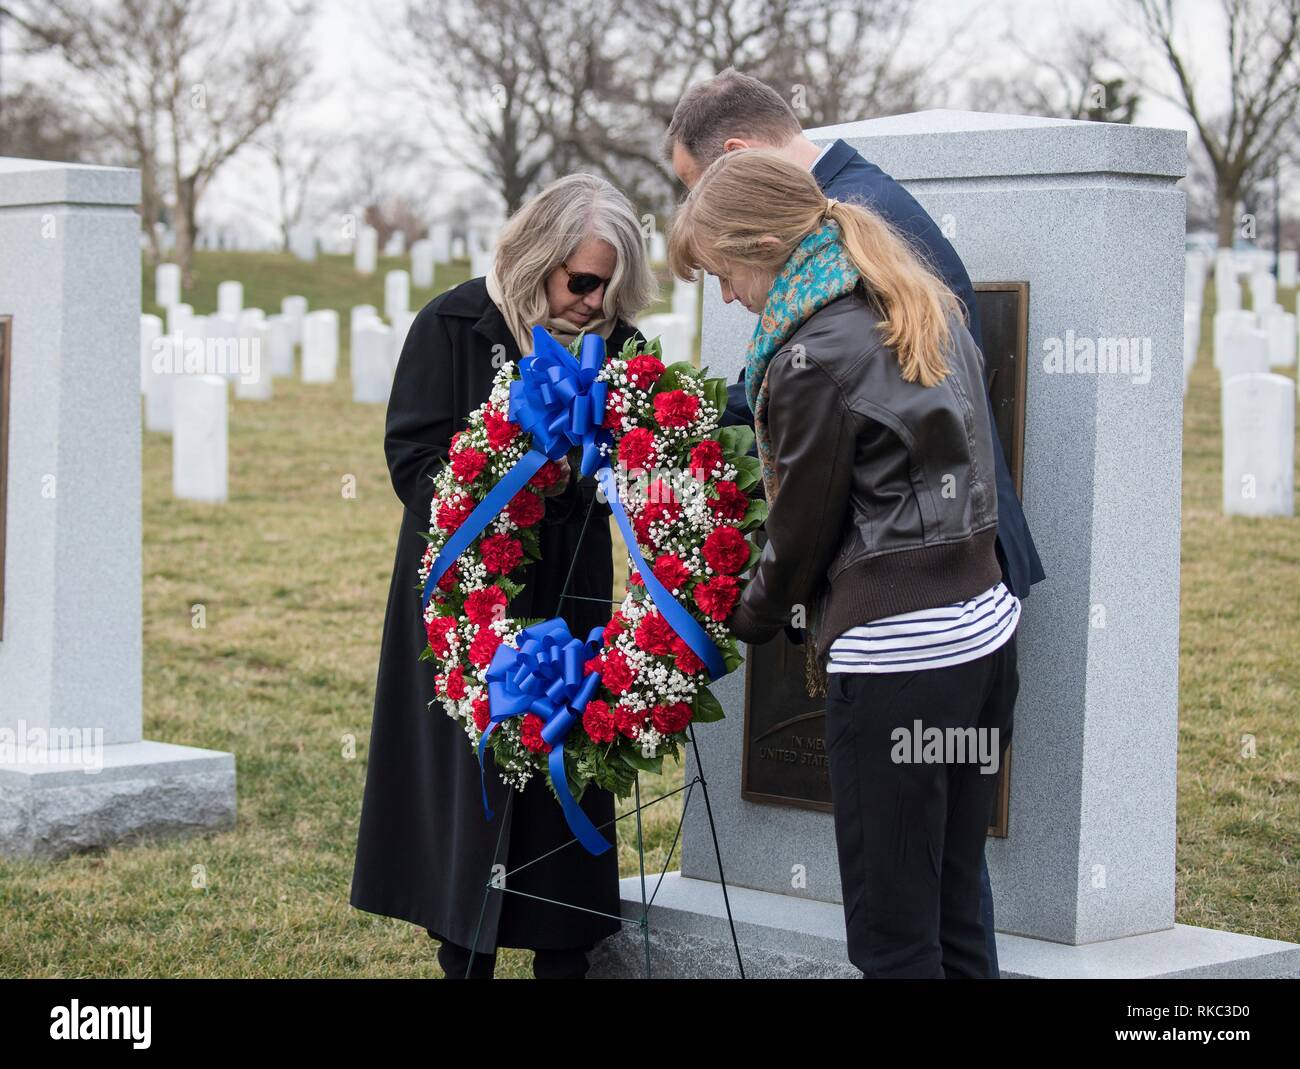 NASA Administrator Jim Bridenstine places a wreath at the Space Shuttle Columbia Memorial with Kristy Carroll, left, and daughter Vivian Carroll who were friends of Space Shuttle Columbia pilot William McCool during the Space Agency Day of Remembrance at Arlington National Cemetery February 7, 2019 in Arlington, Virginia.  Wreaths were laid in memory of those men and women who lost their lives in the quest for space exploration. Stock Photo